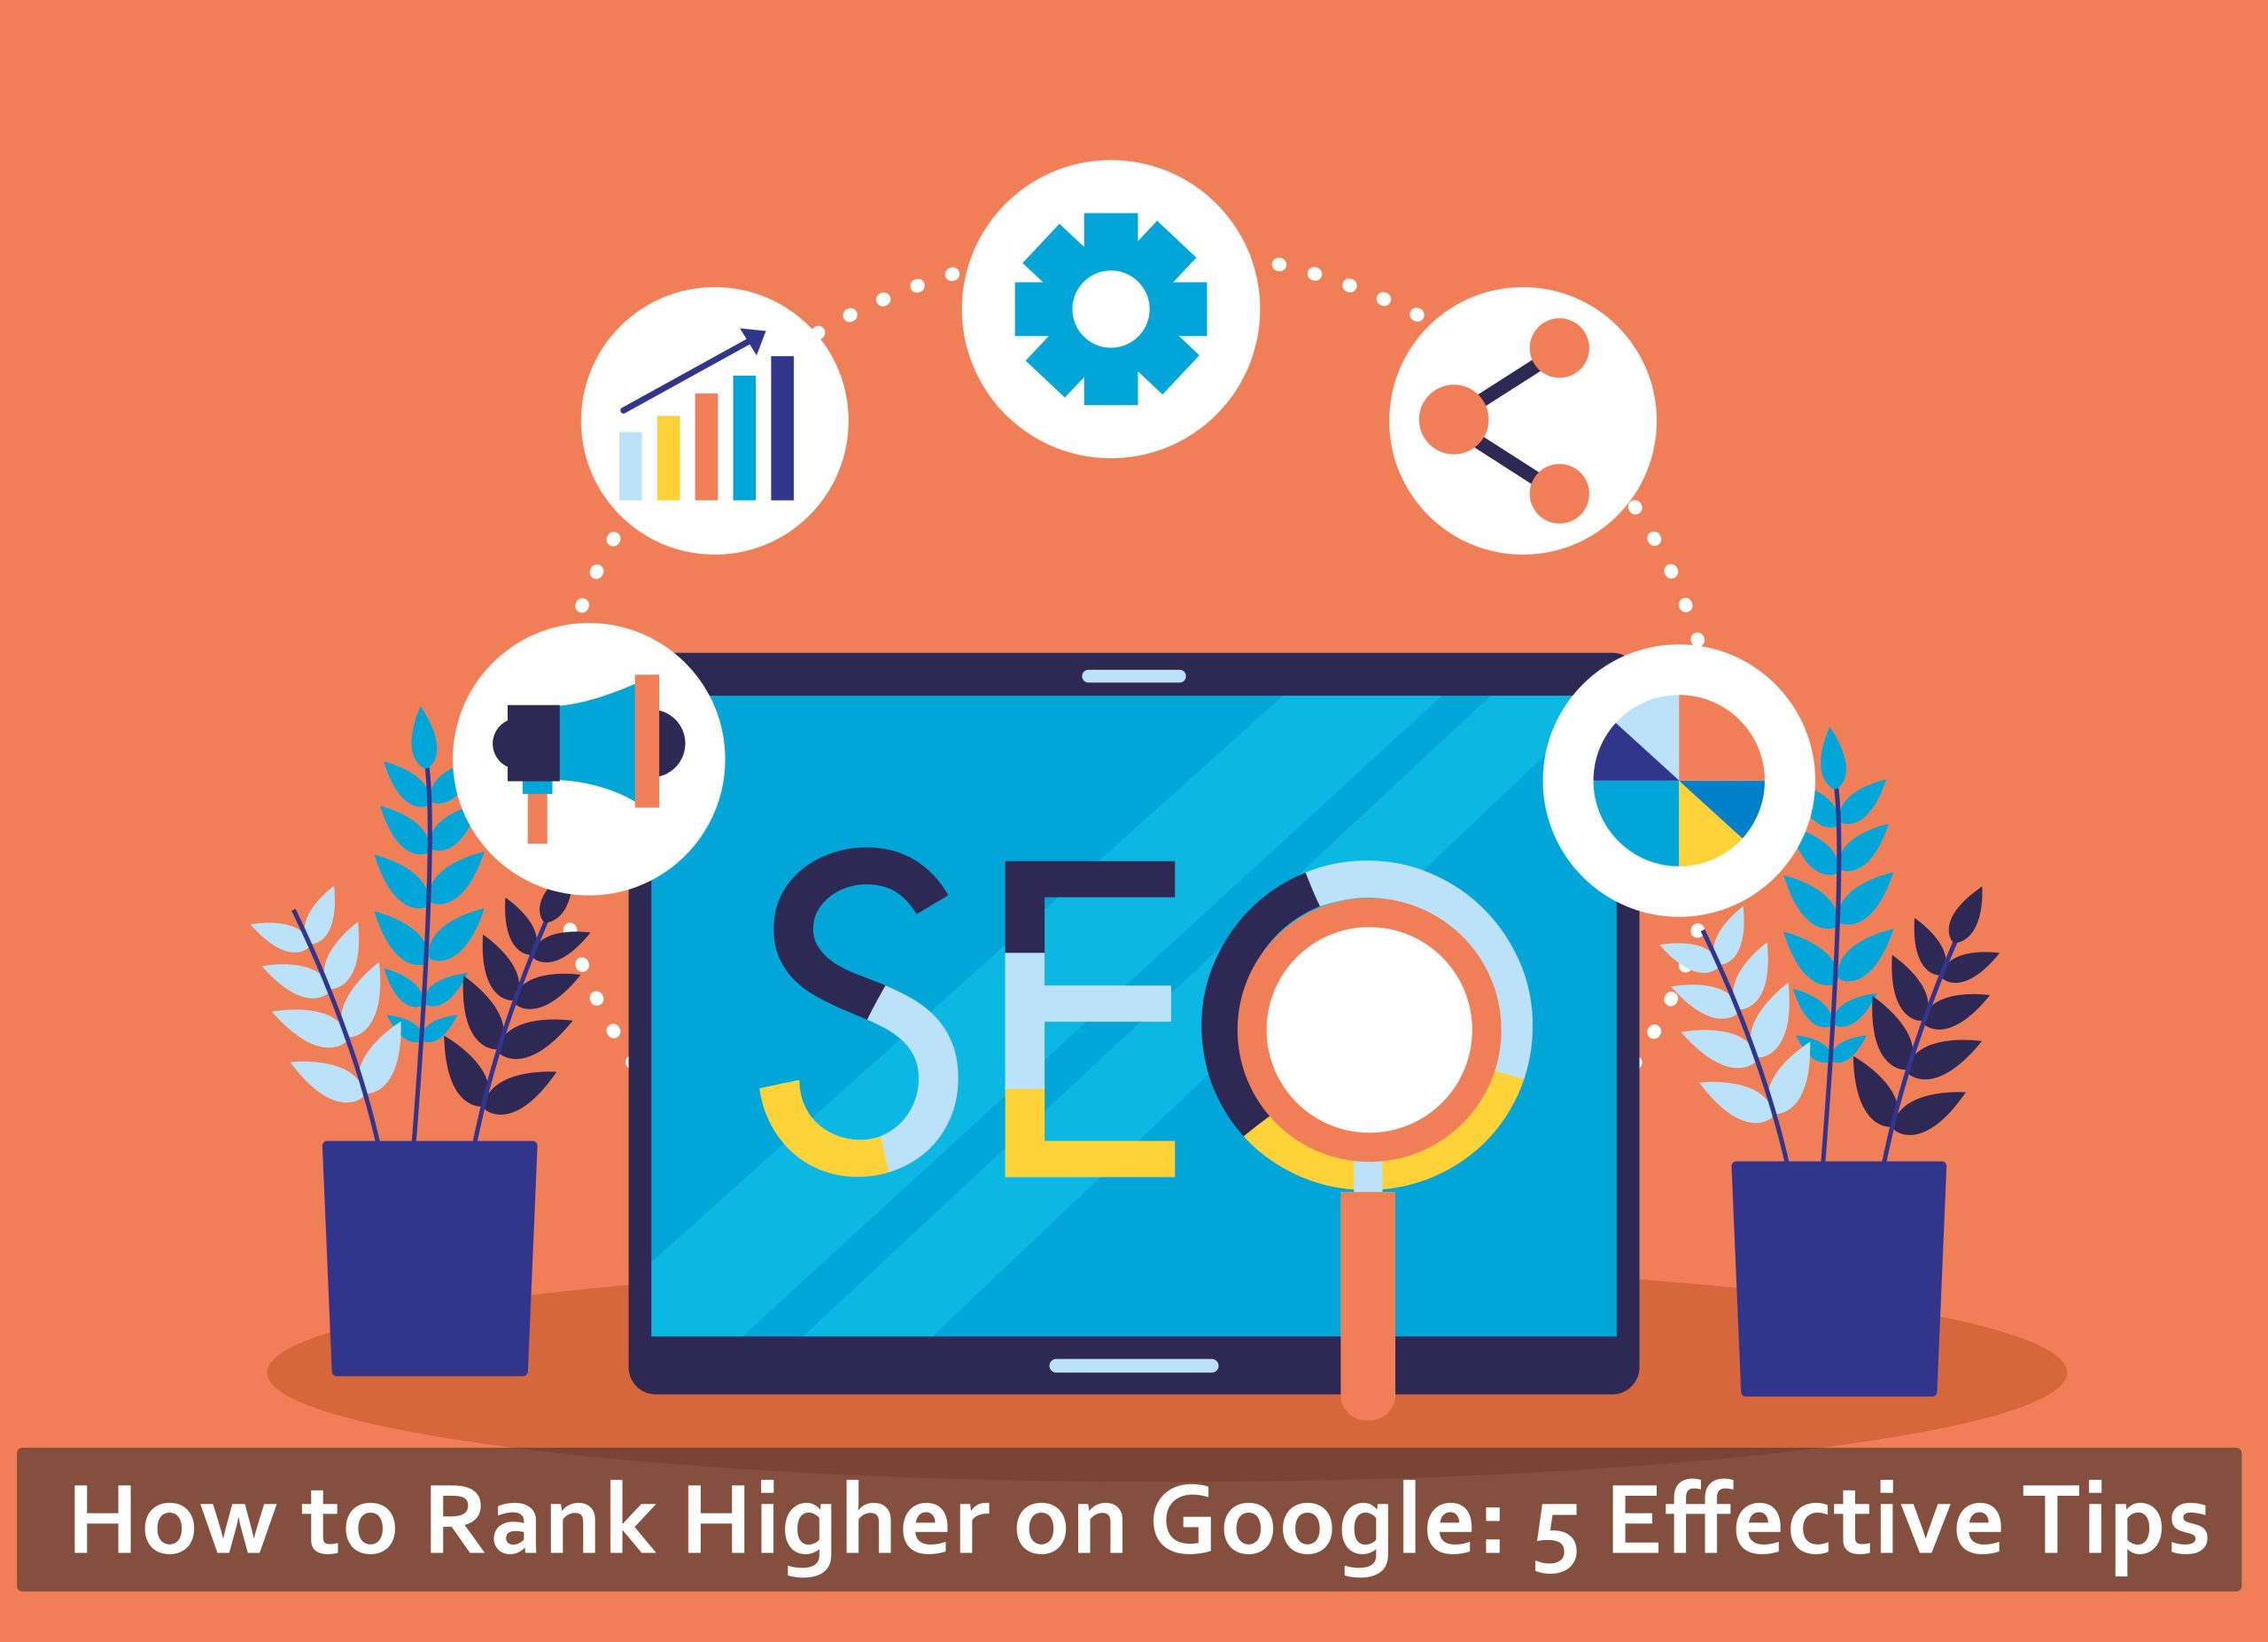 How to Rank Higher on Google: 5 Effective Tips